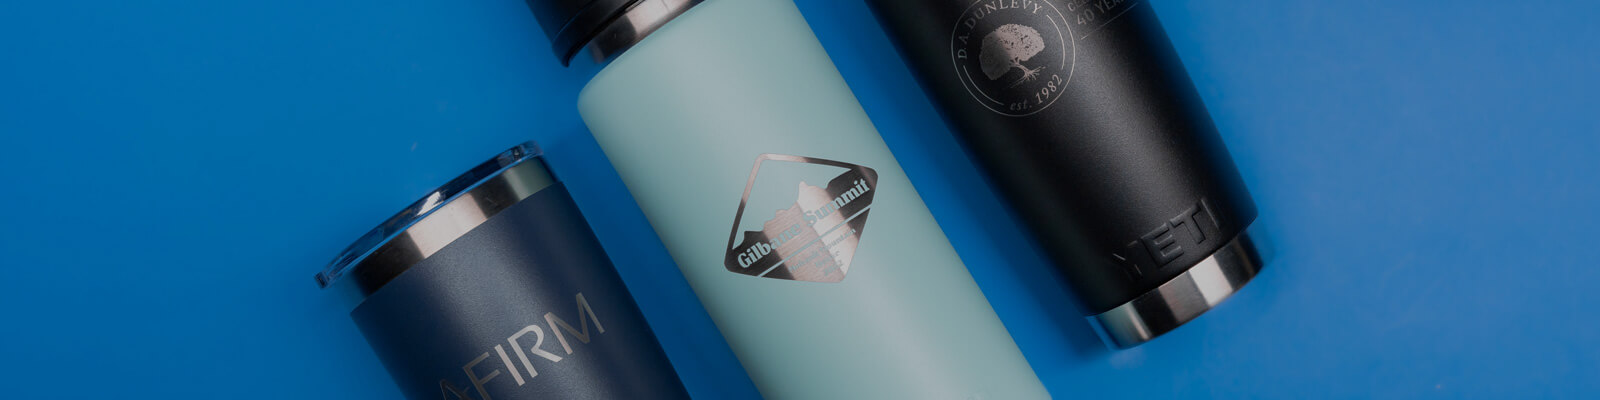 Yeti Is Letting You Customize Its Popular Drinkware for Free for a